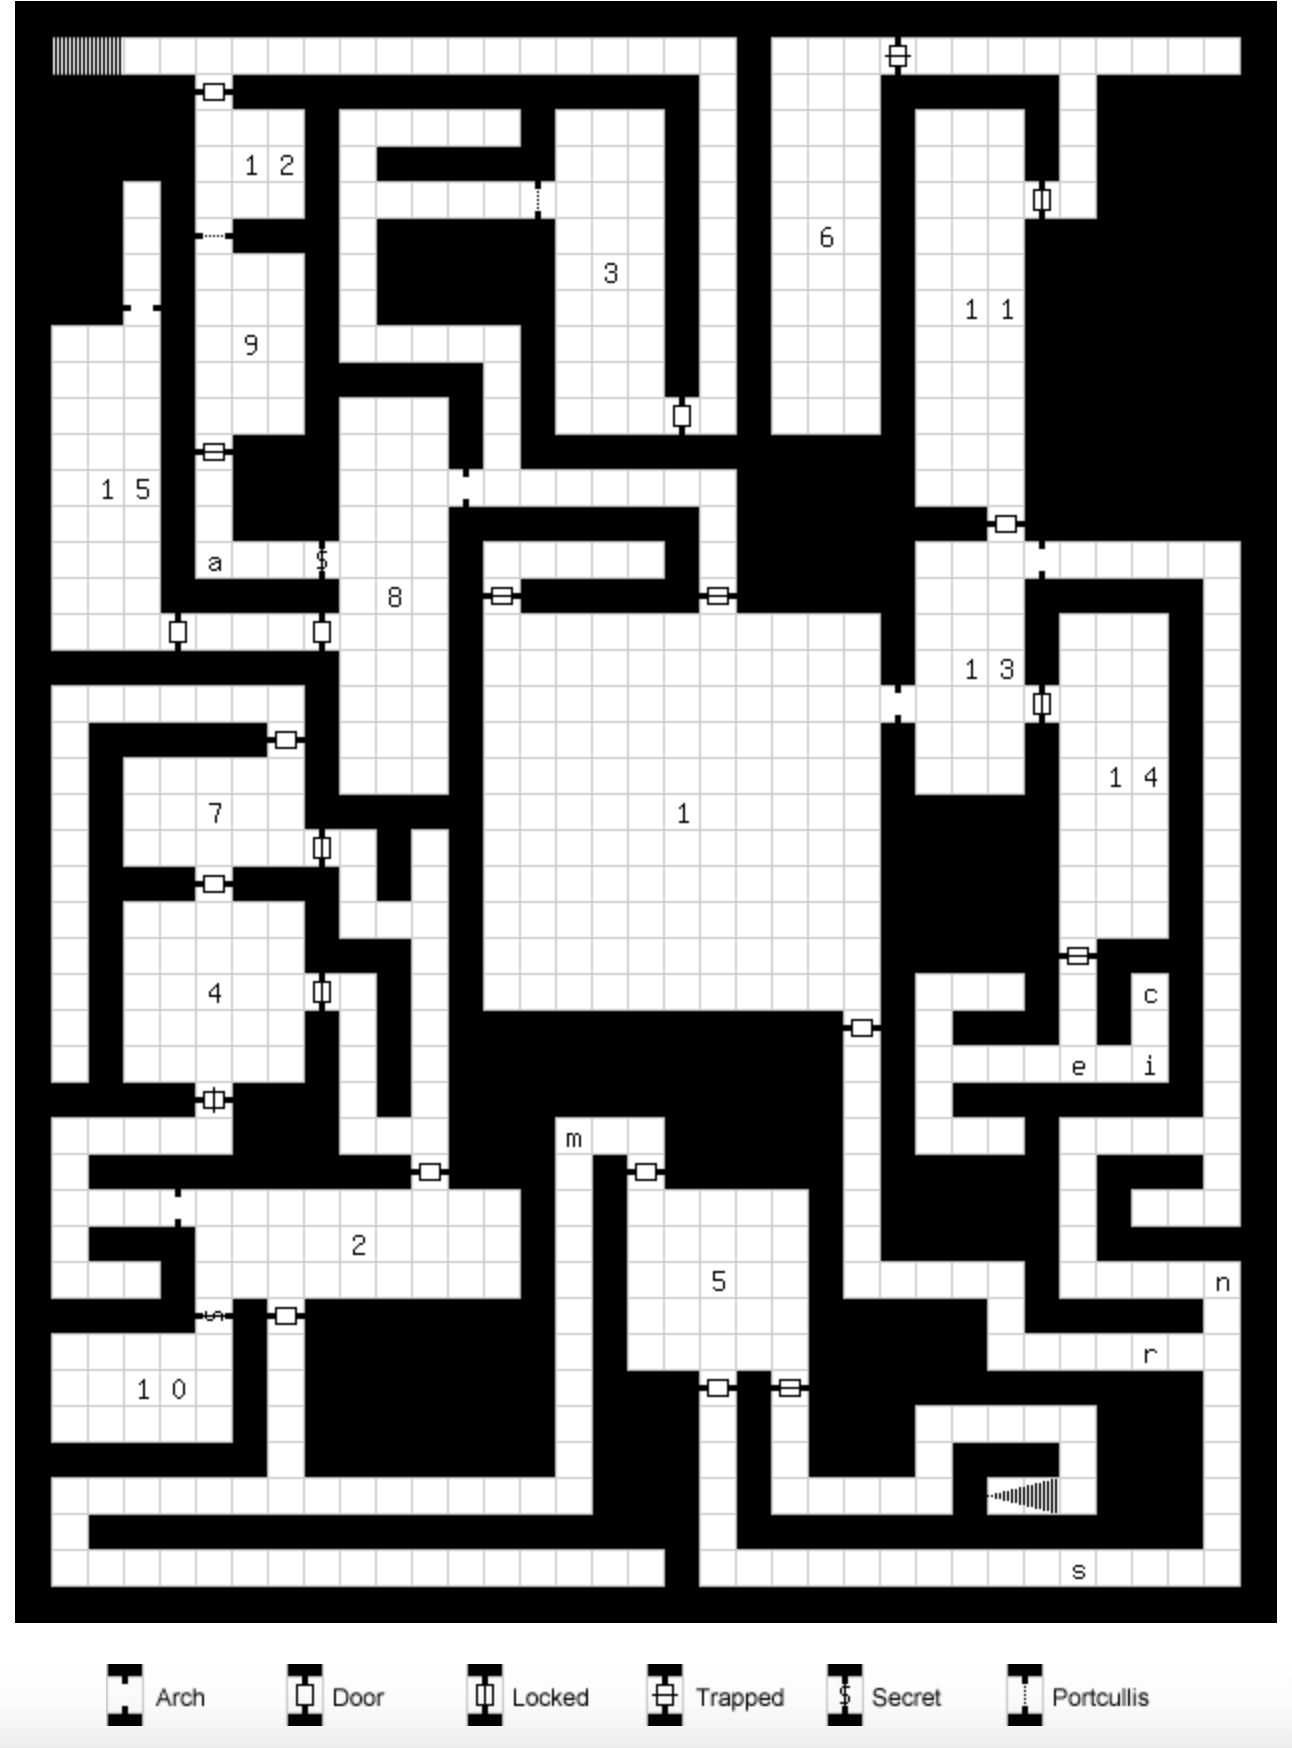 An example image of a map for use in Roll20